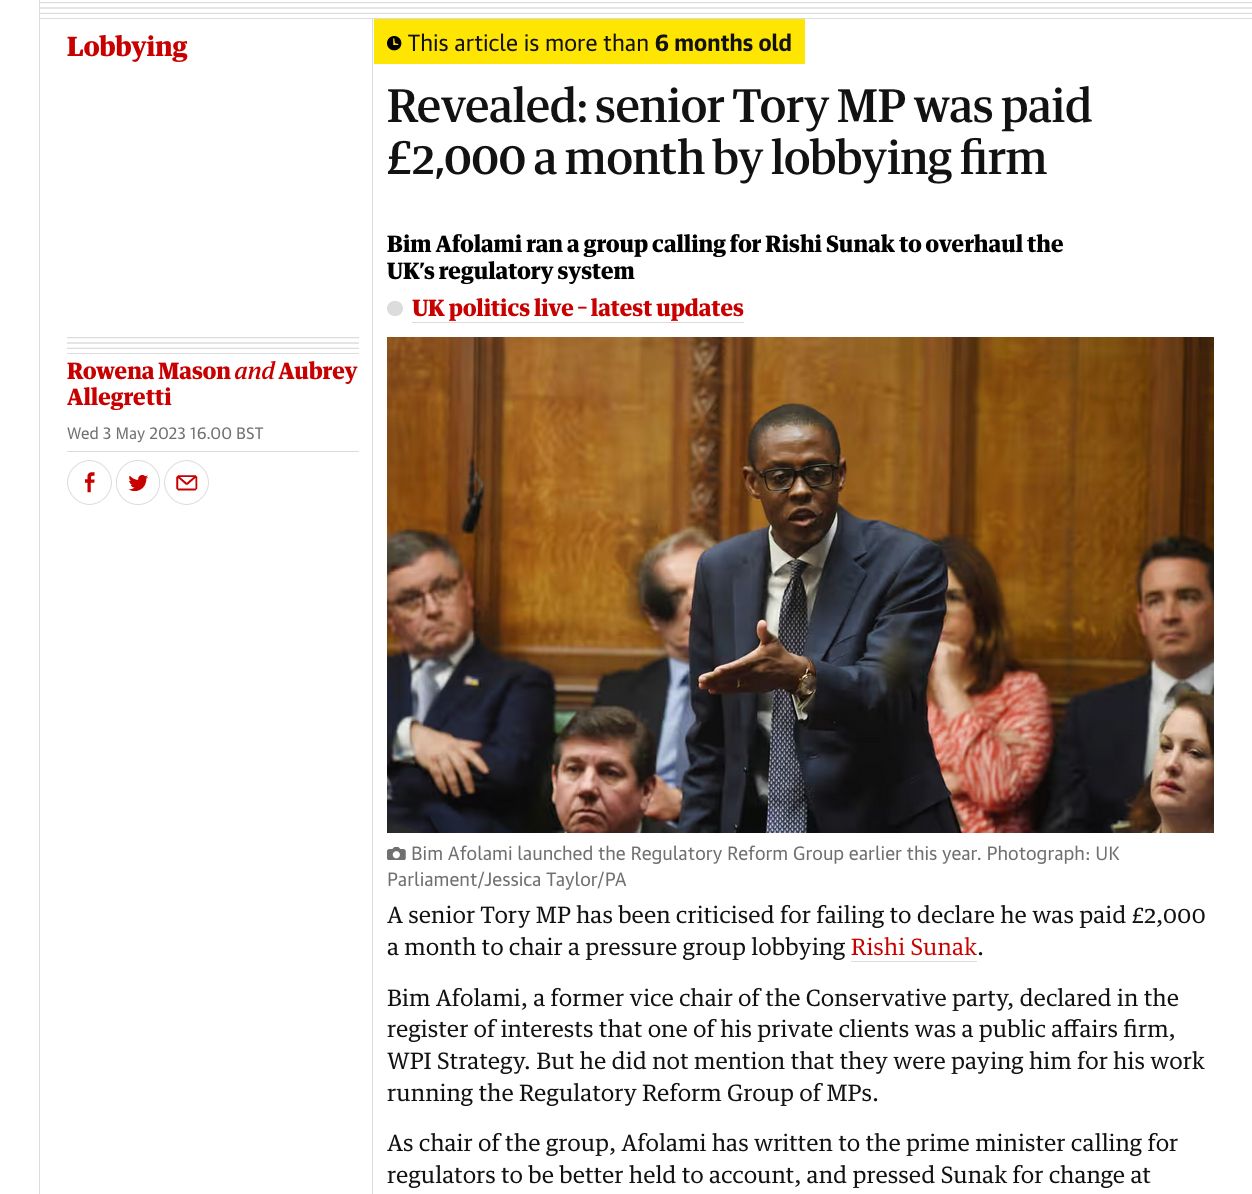 THE GUARDIAN UK NEWS ARTICLE HEADLINE WITH BIM AFOLAMI - "REVEALED: SENIOR TORY MP WAS PAID £2,000 A MONTH BY LOBBYING FIRM"